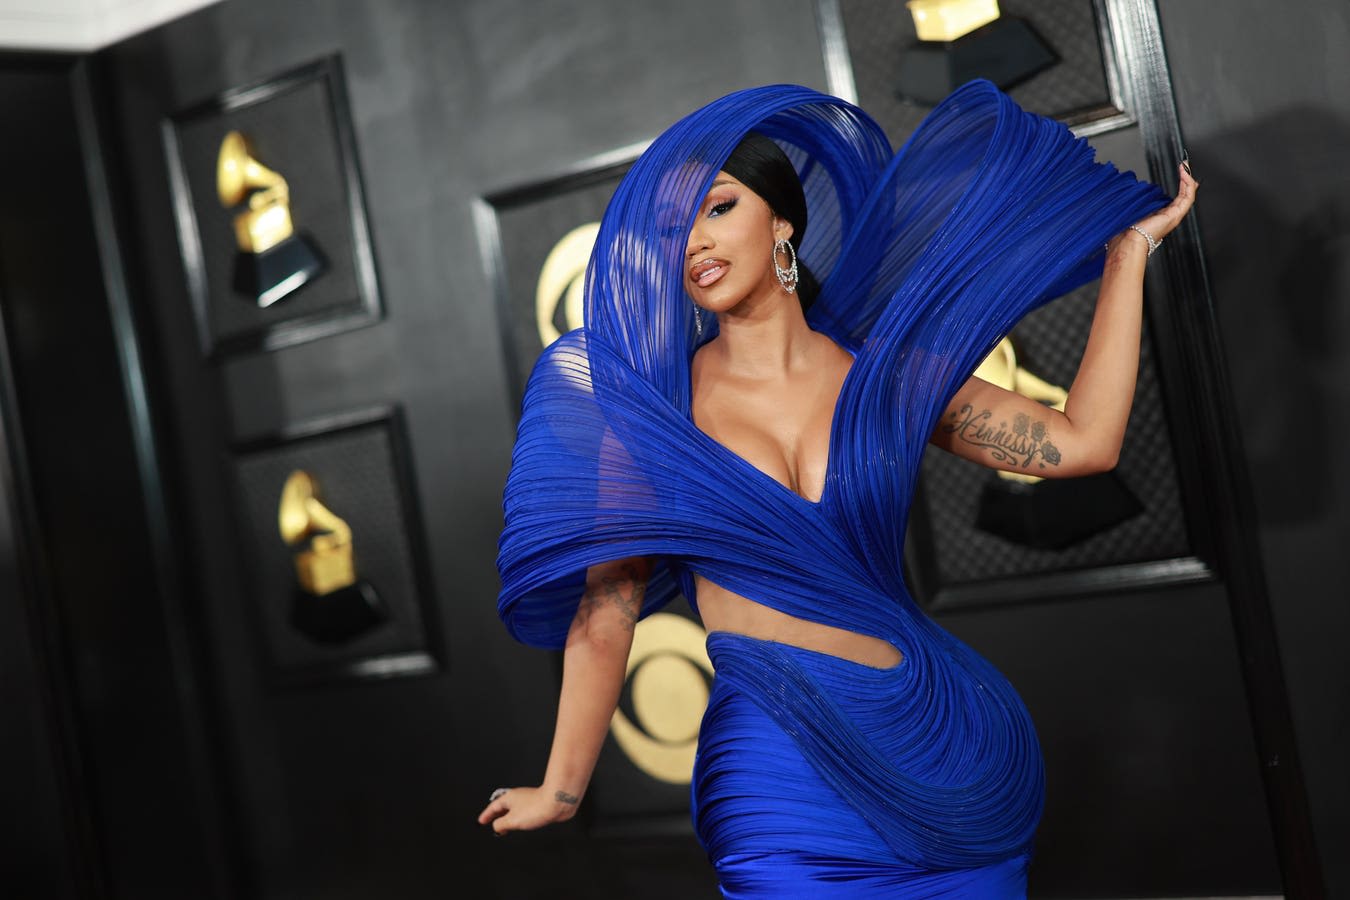 Cardi B Earns A Fast Top 10 Hit With One Of Latin Music’s Biggest Superstars